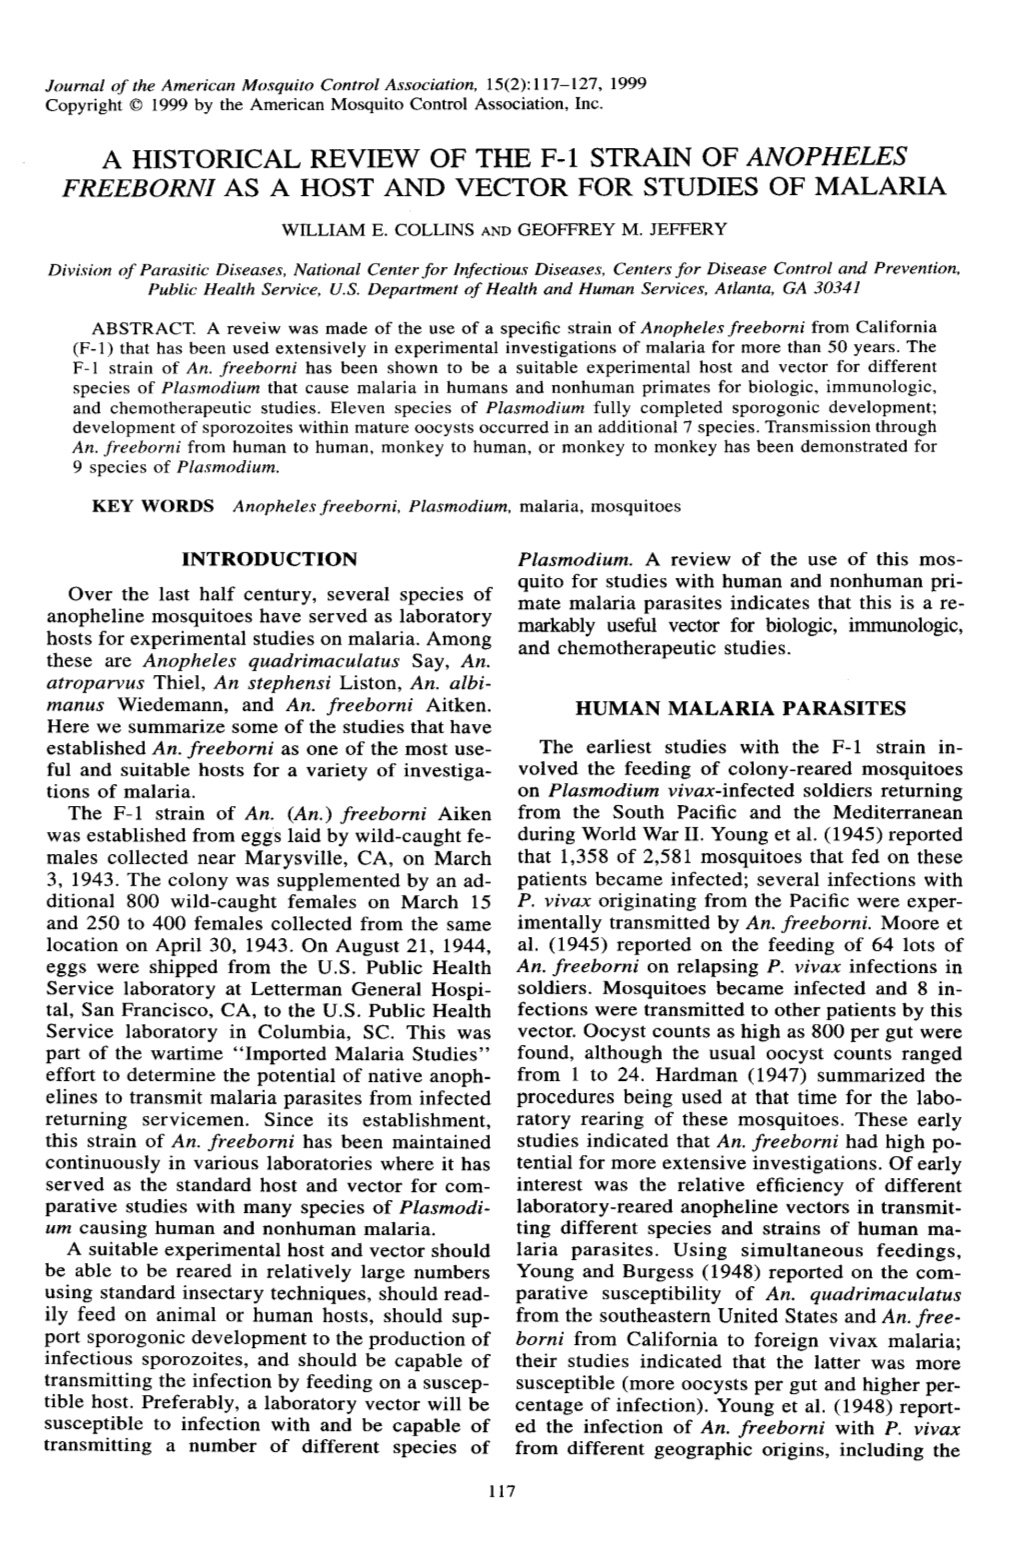 A HISTORICAL REVIEW of the F-L STRAIN of ANOPHELES FREEBORNI AS a HOST and VECTOR for STUDIES of MALARIA